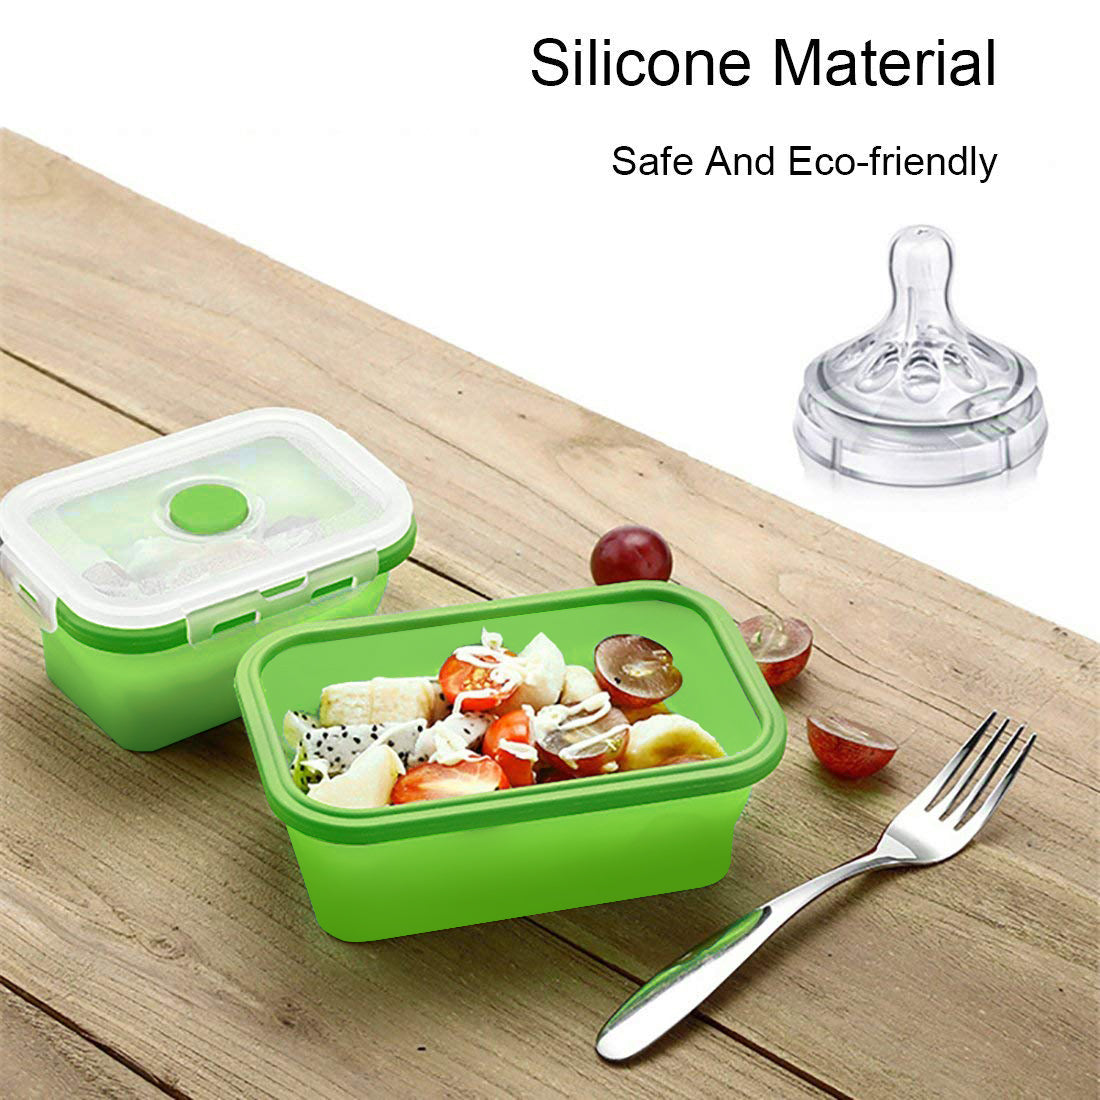 Food Grade Silicone Collapsible Bowl Lunch Box - Portable Silicone